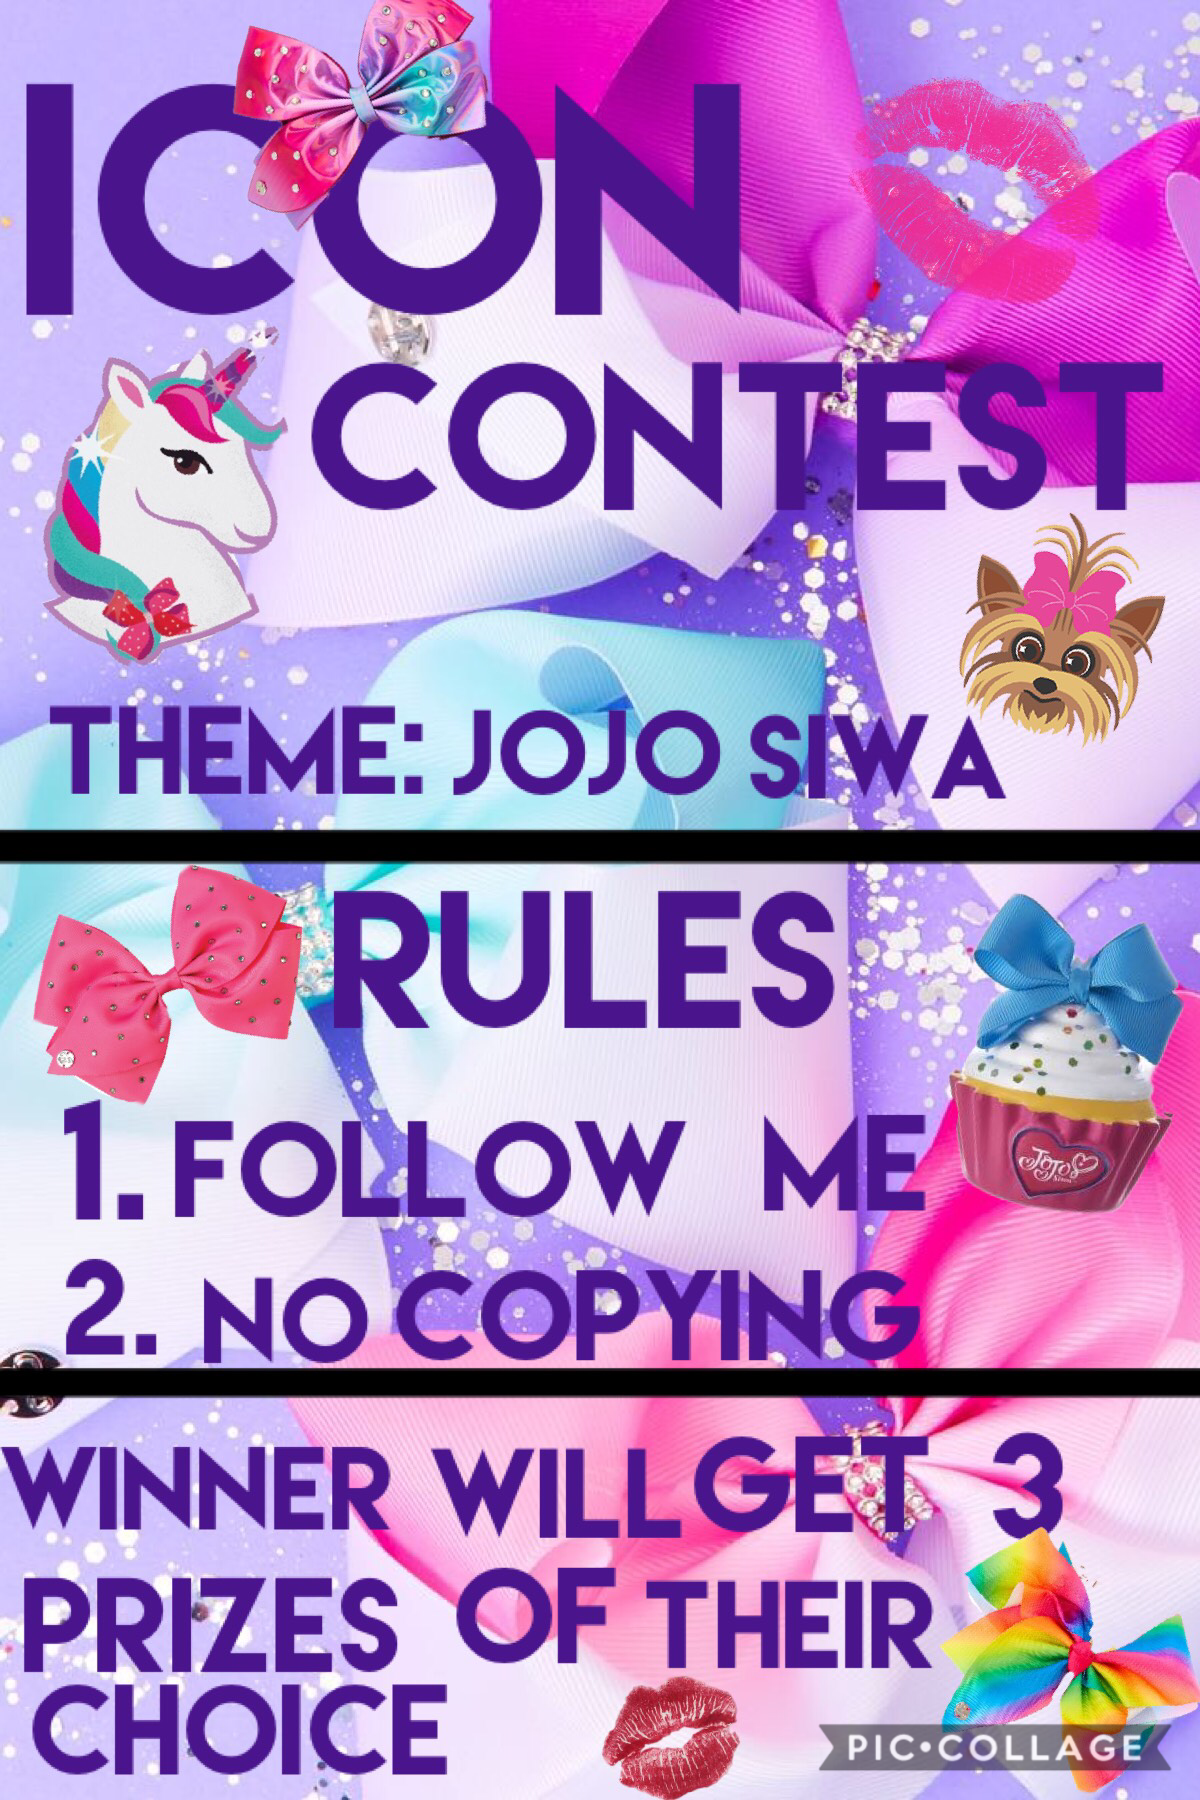 Icon contest end date is August 6th